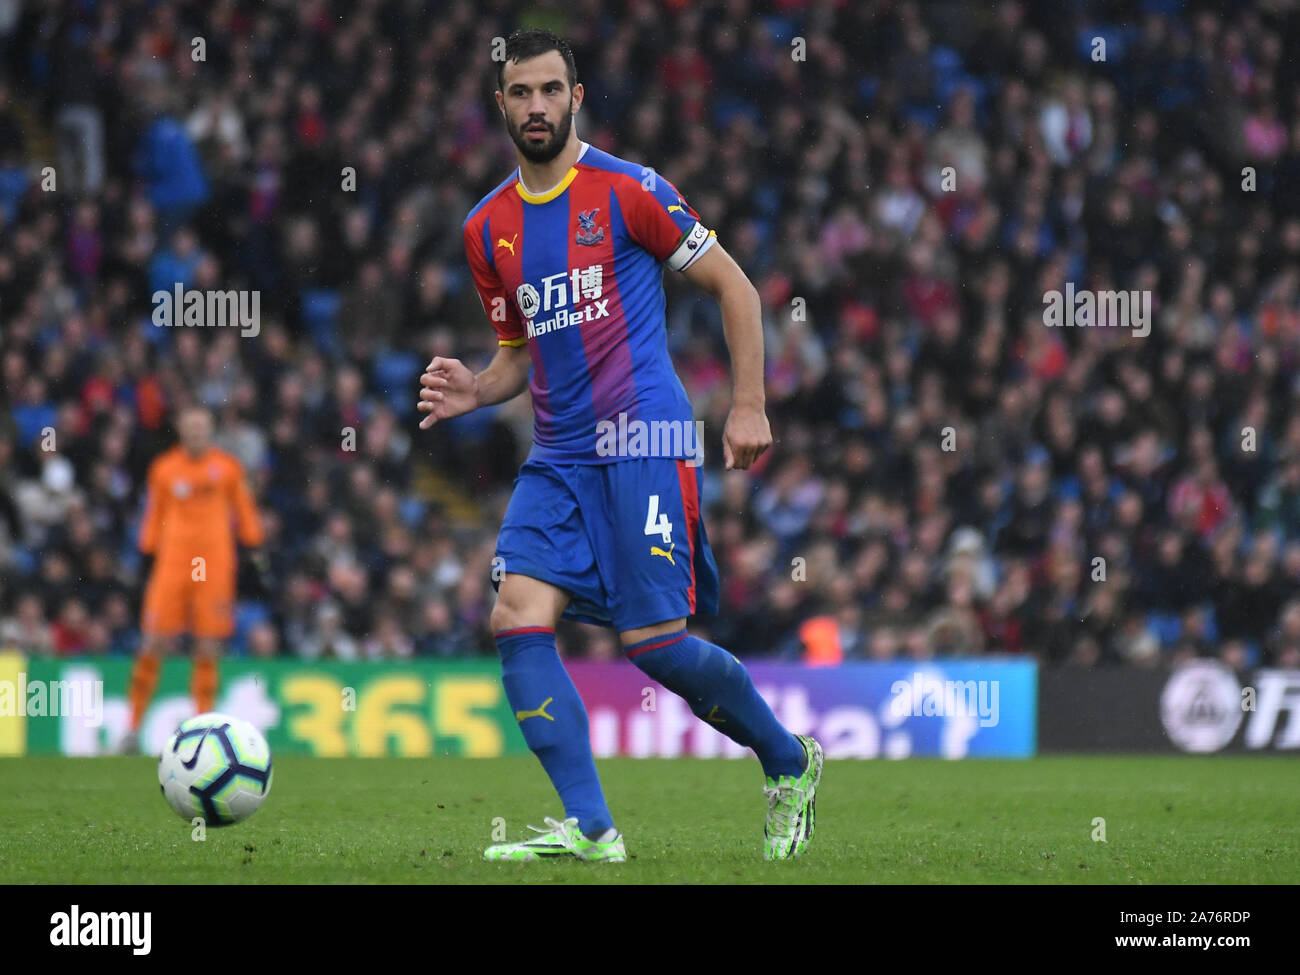 LONDON, ENGLAND - SEPTEMBER 22, 2018: Luka Milivojevic of Palace pictured during the 2018/19 English Premier League game between Crystal Palace FC and Newcastle United at Selhurst Park. Stock Photo